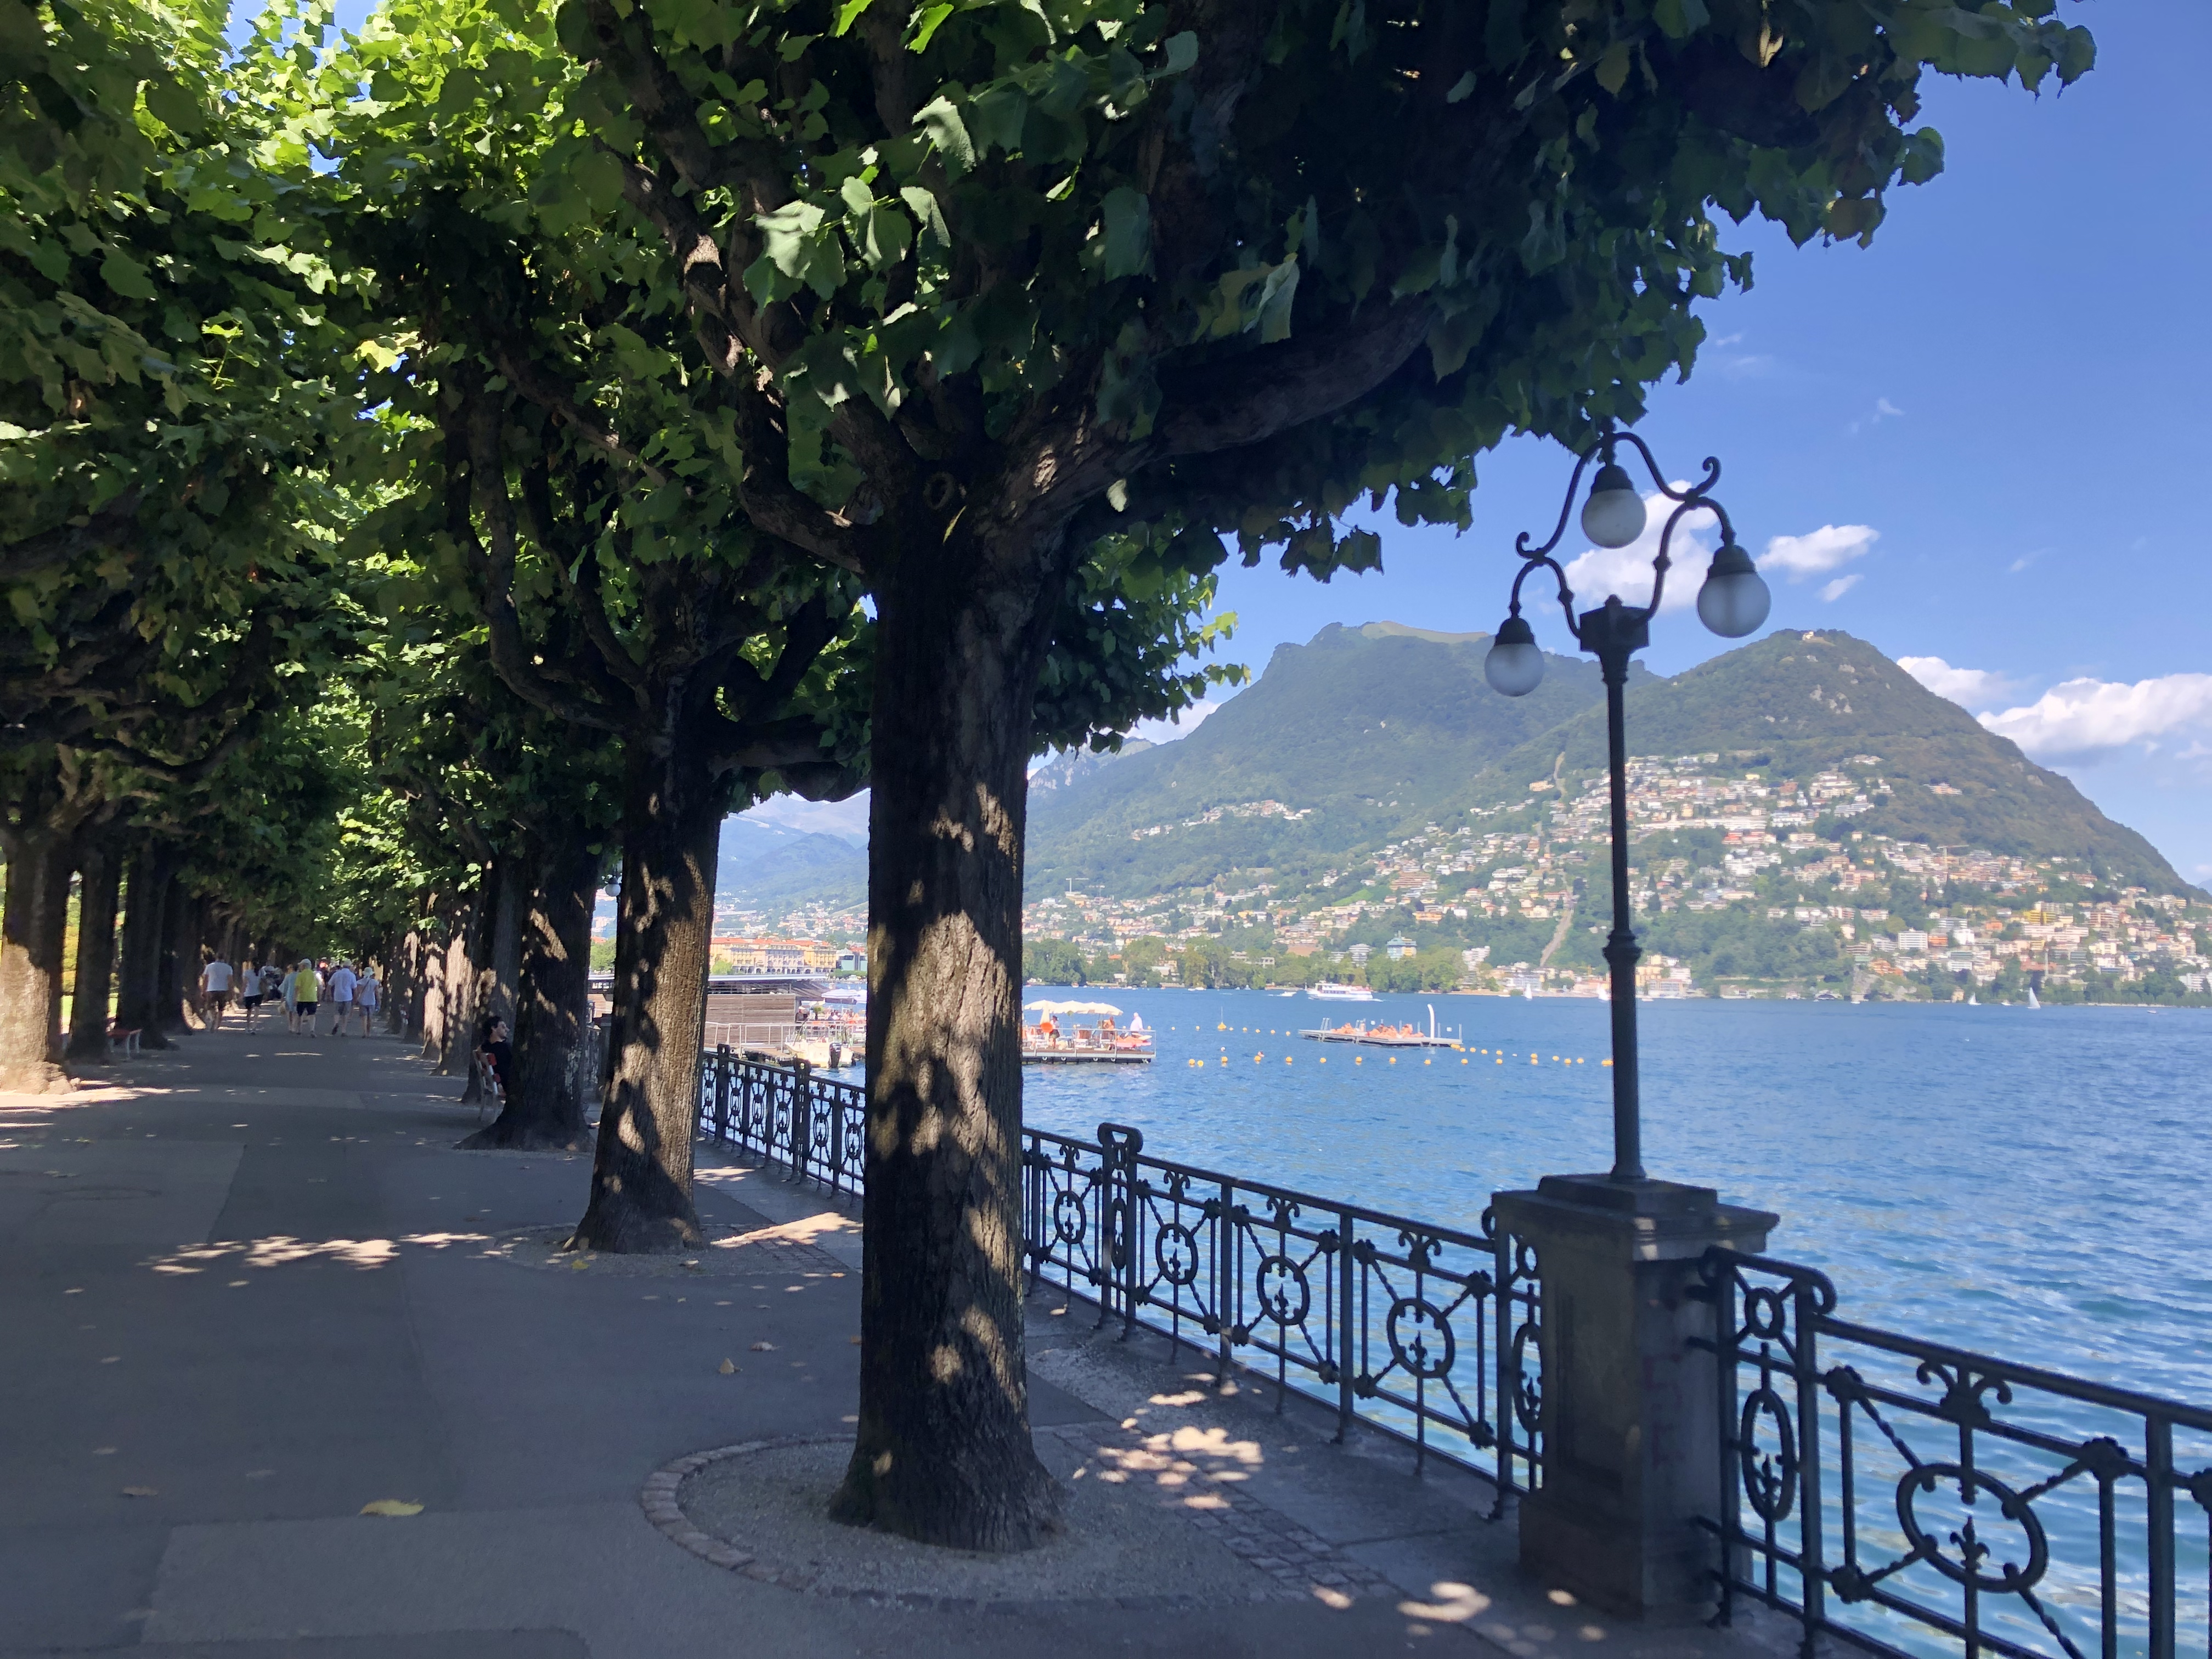 Trees in Lugano